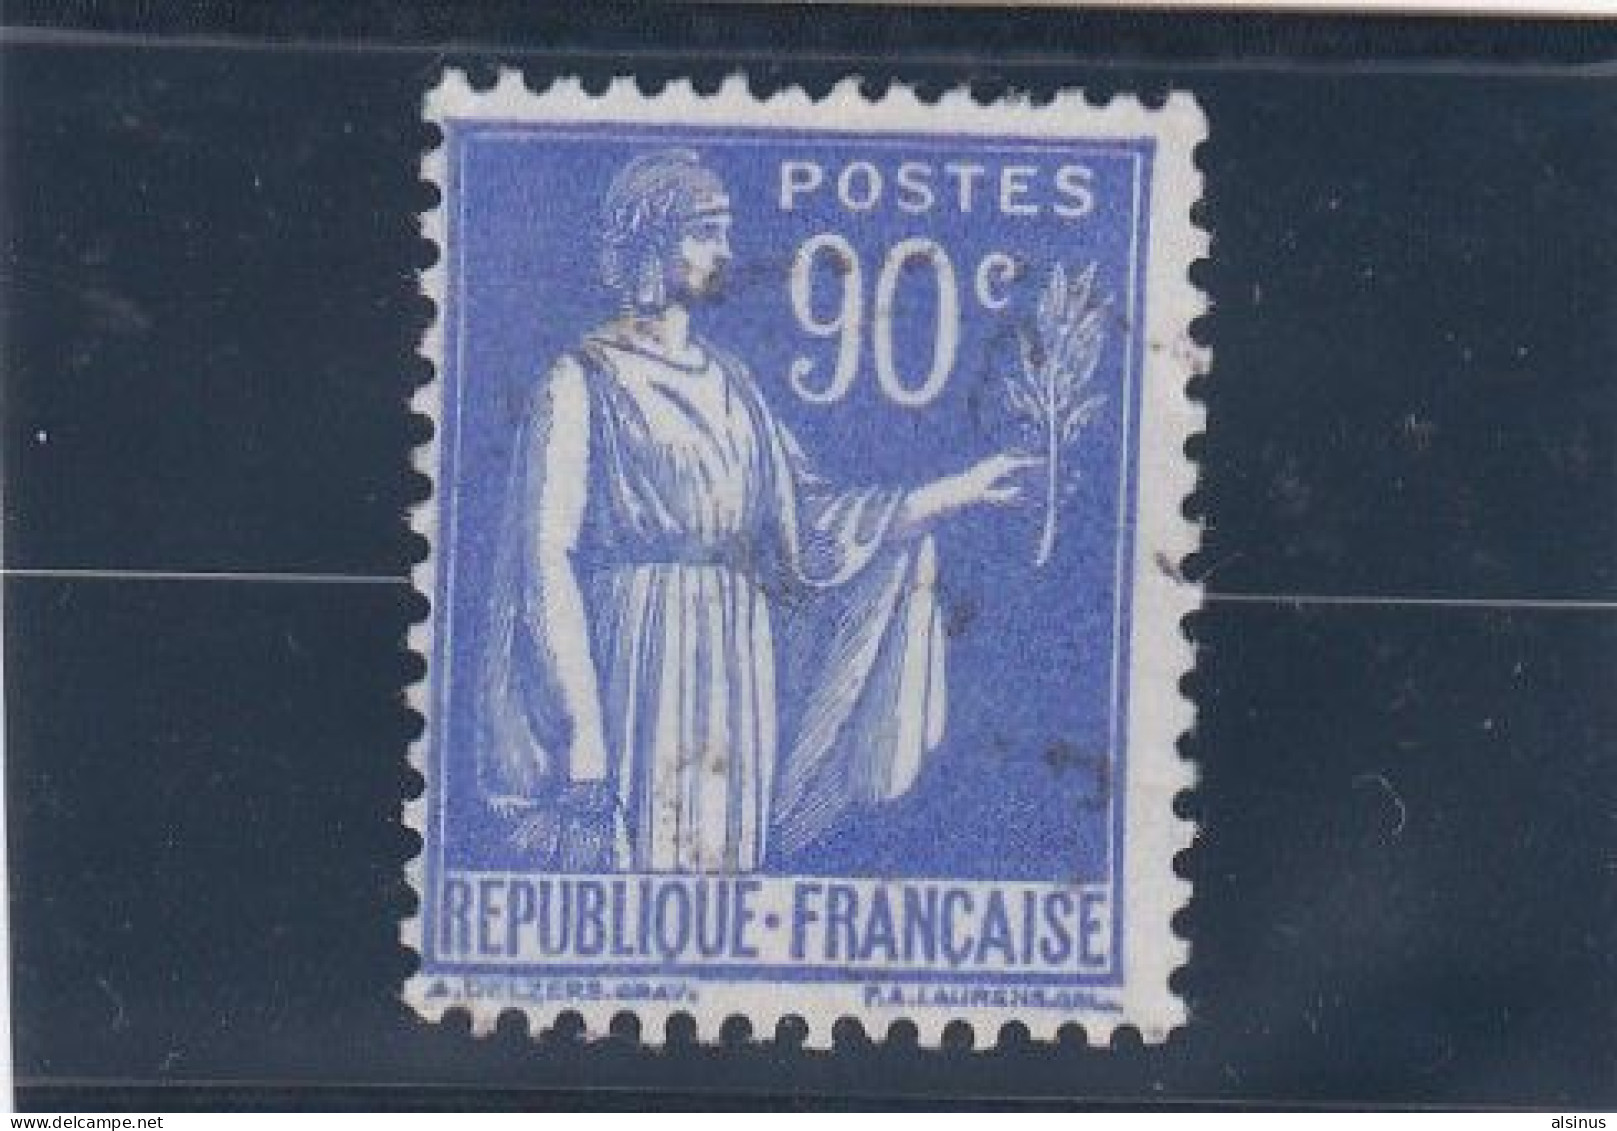 FRANCE - TYPE PAIX - N° 368b - 90 C OUTREMER - TYPE II - NEUF SANS GOMME - 1932-39 Paix